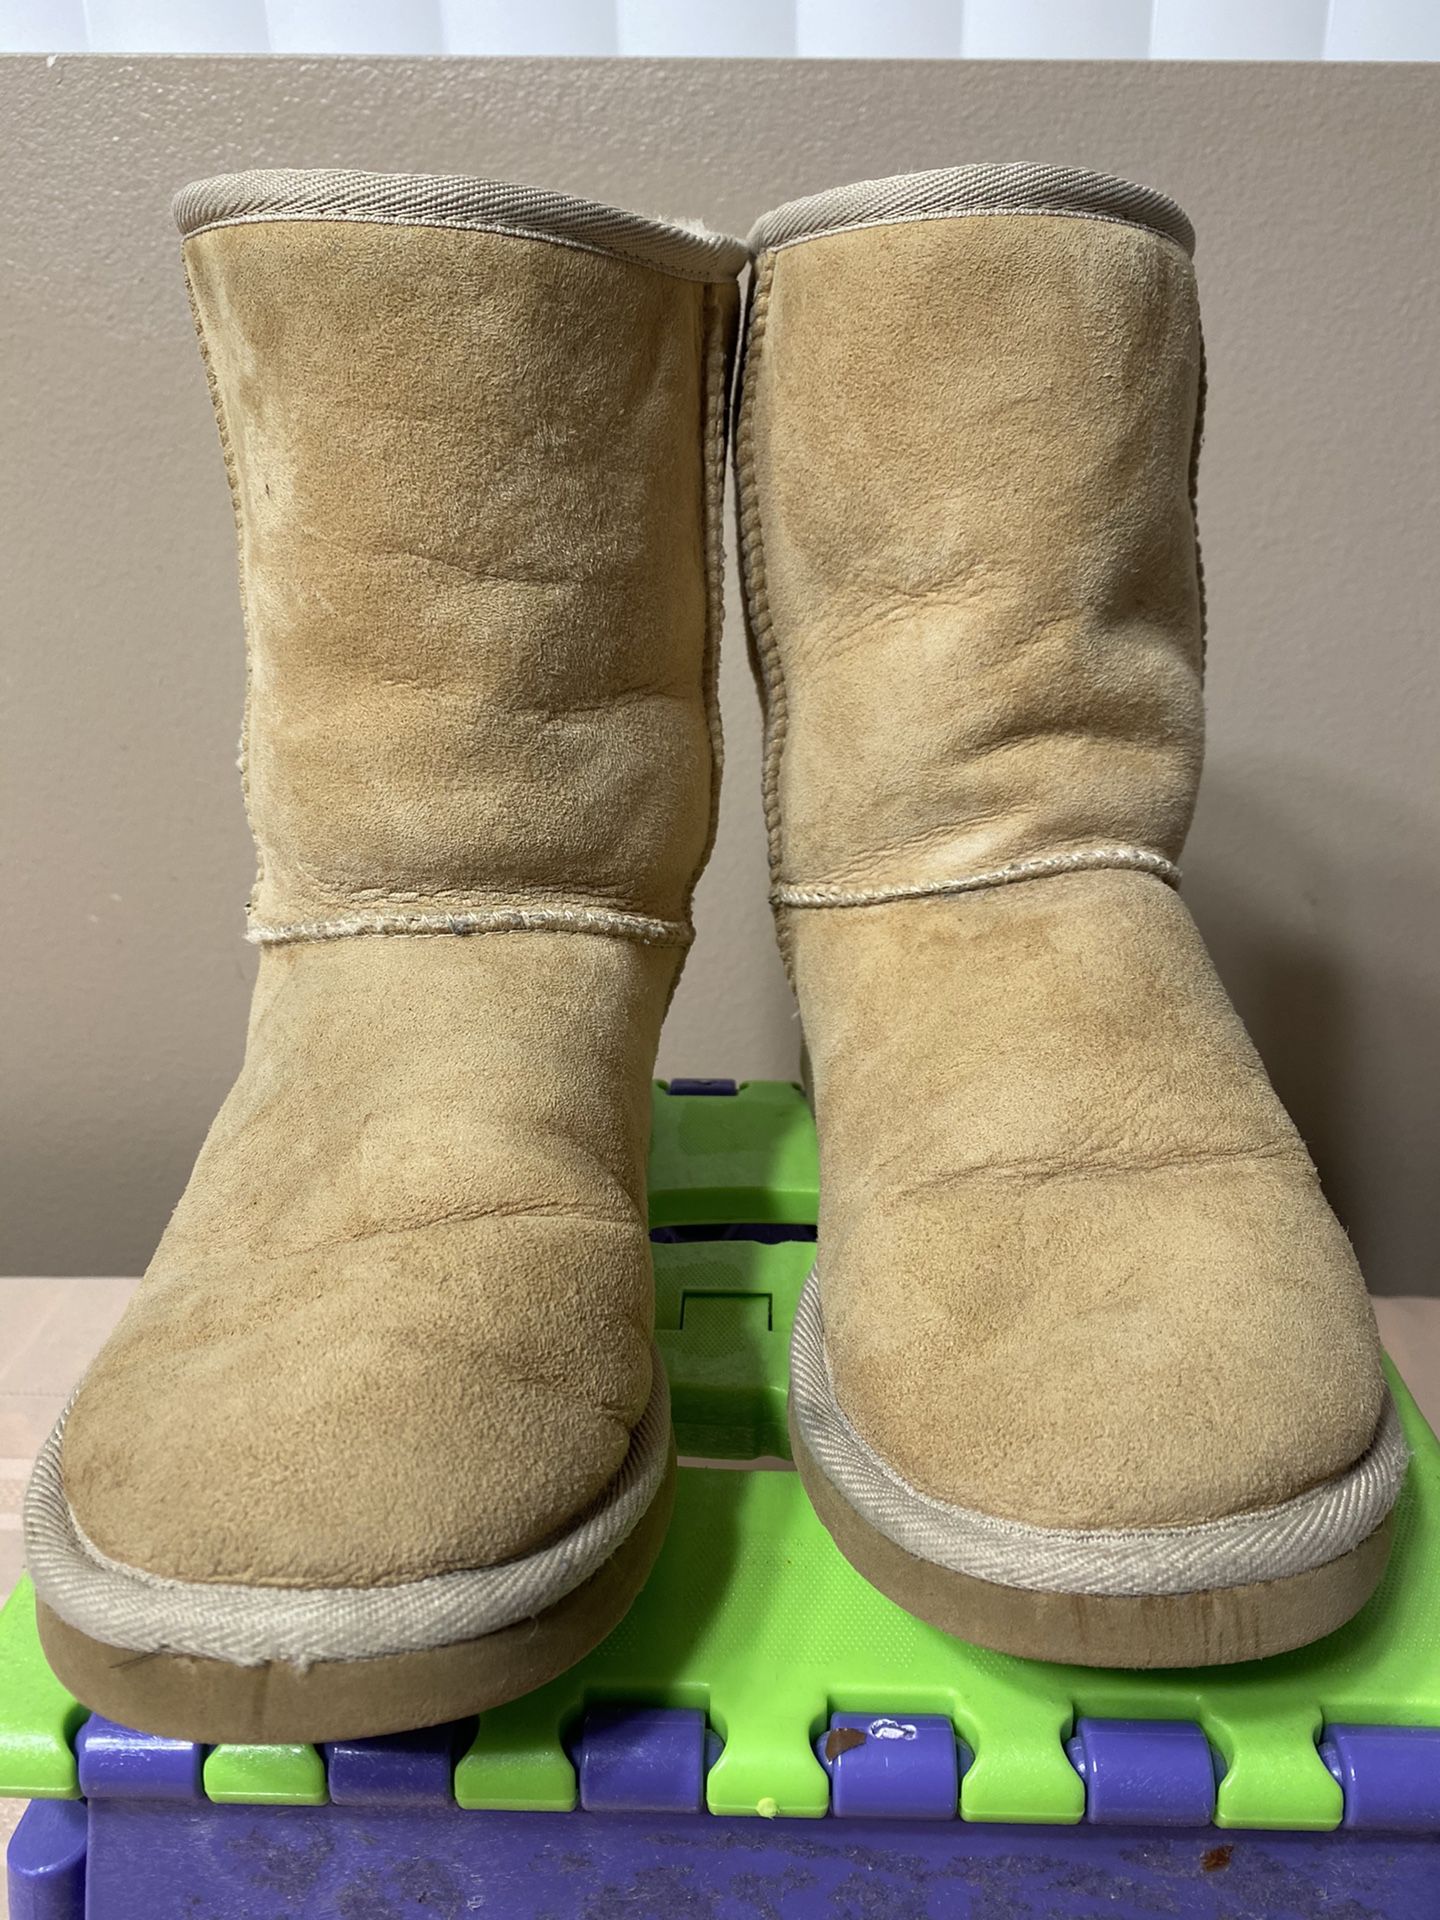 Ugg boots, size women’s 7 USA